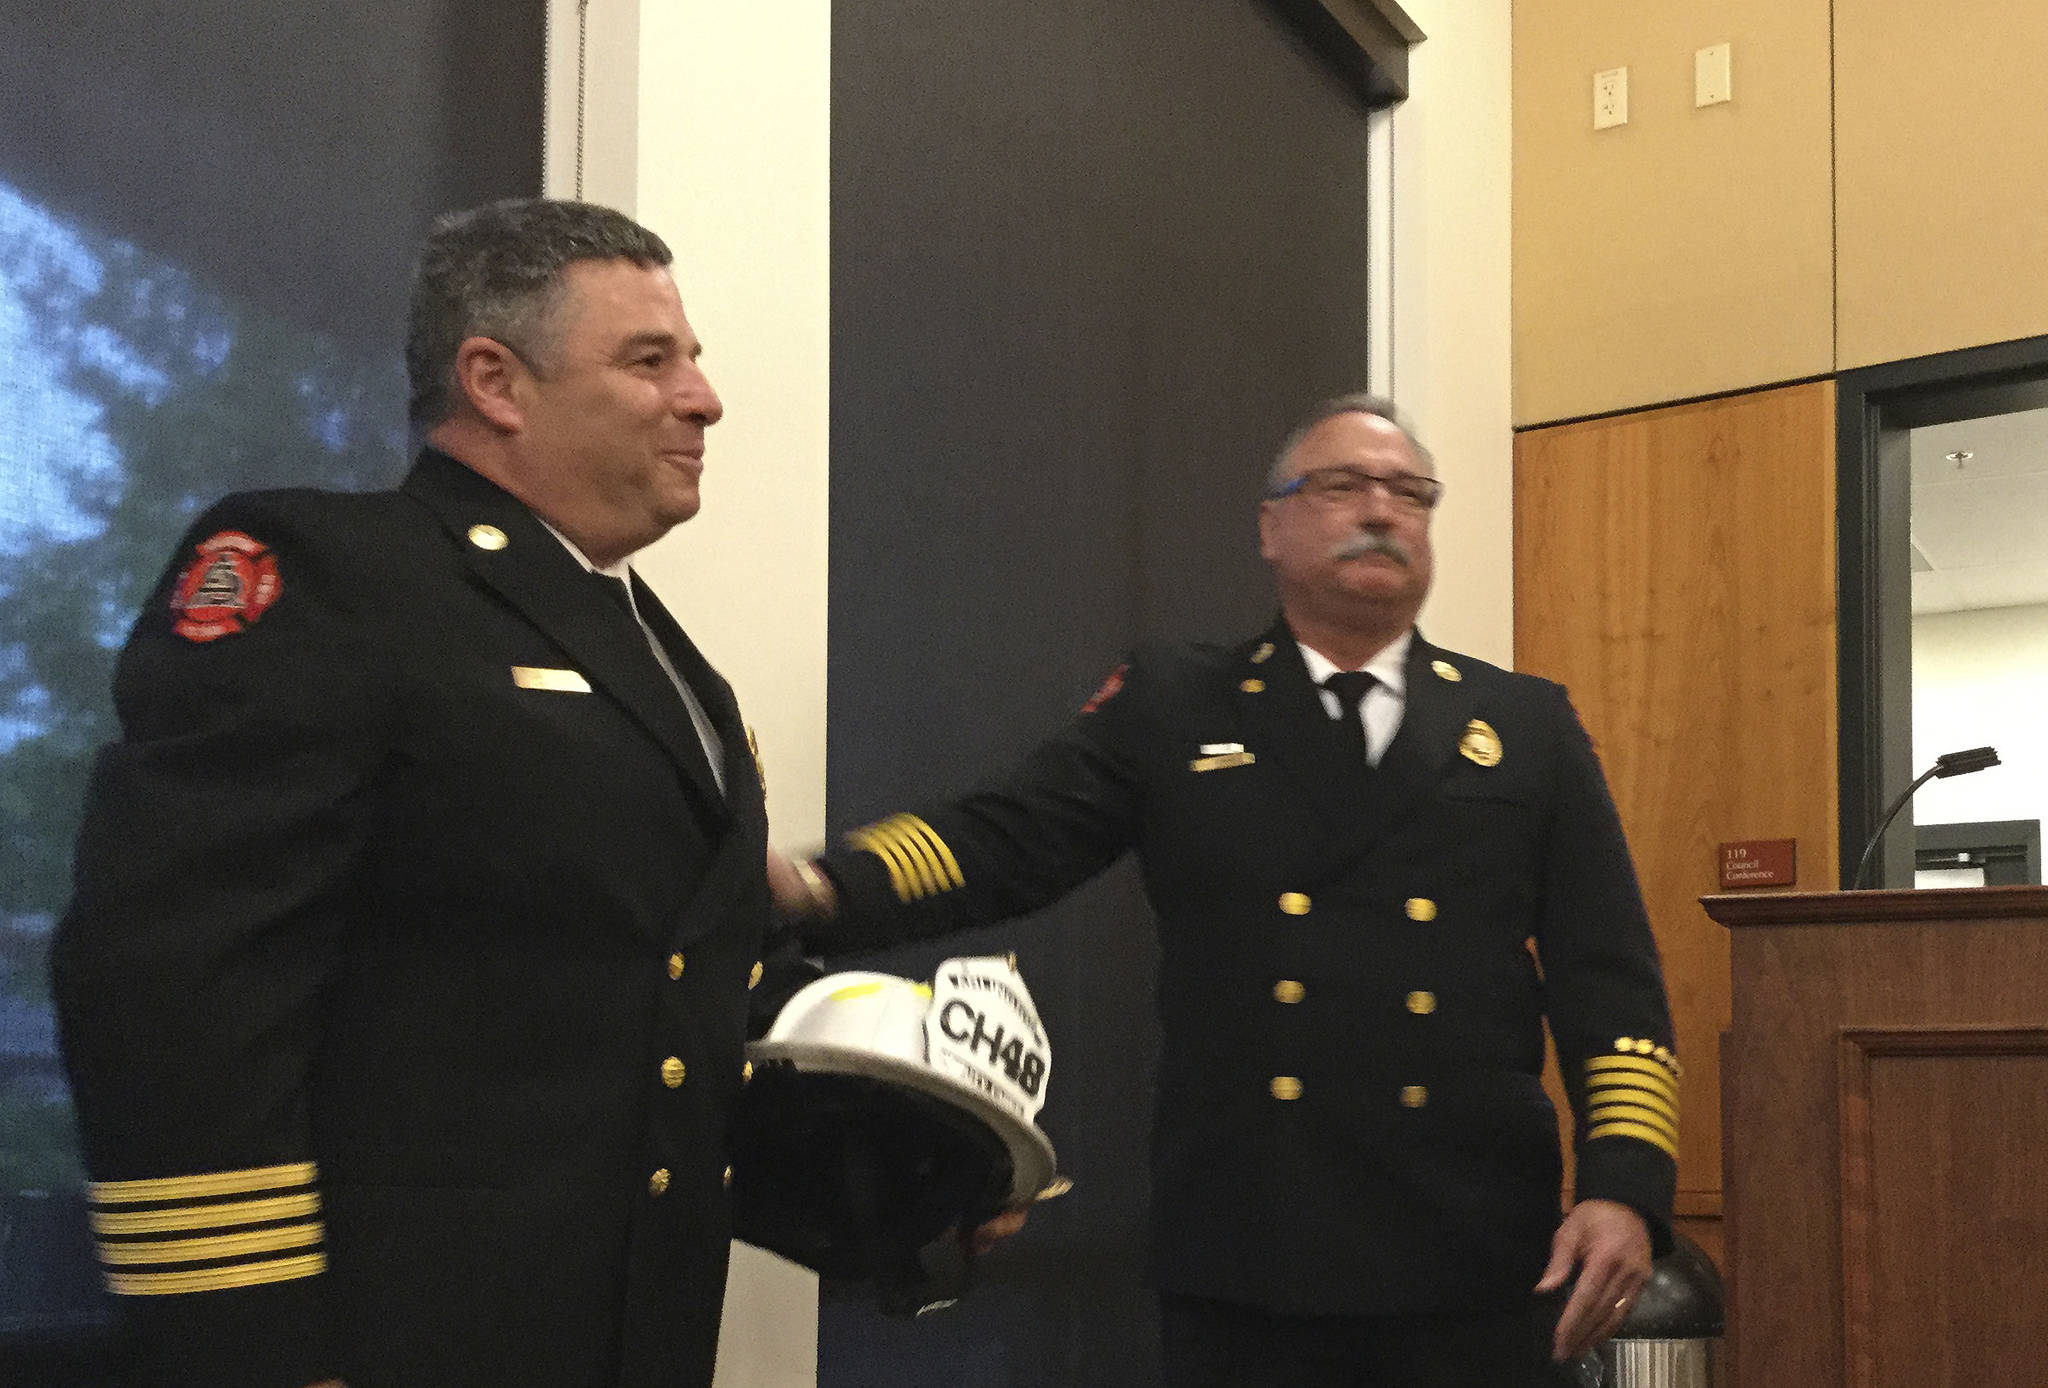 Arlington Chief Bruce Stedman presents Deputy Fire Chief Tom Cooper with his fire helmet and badge at a city council meeting. Cooper retired after 32 years.